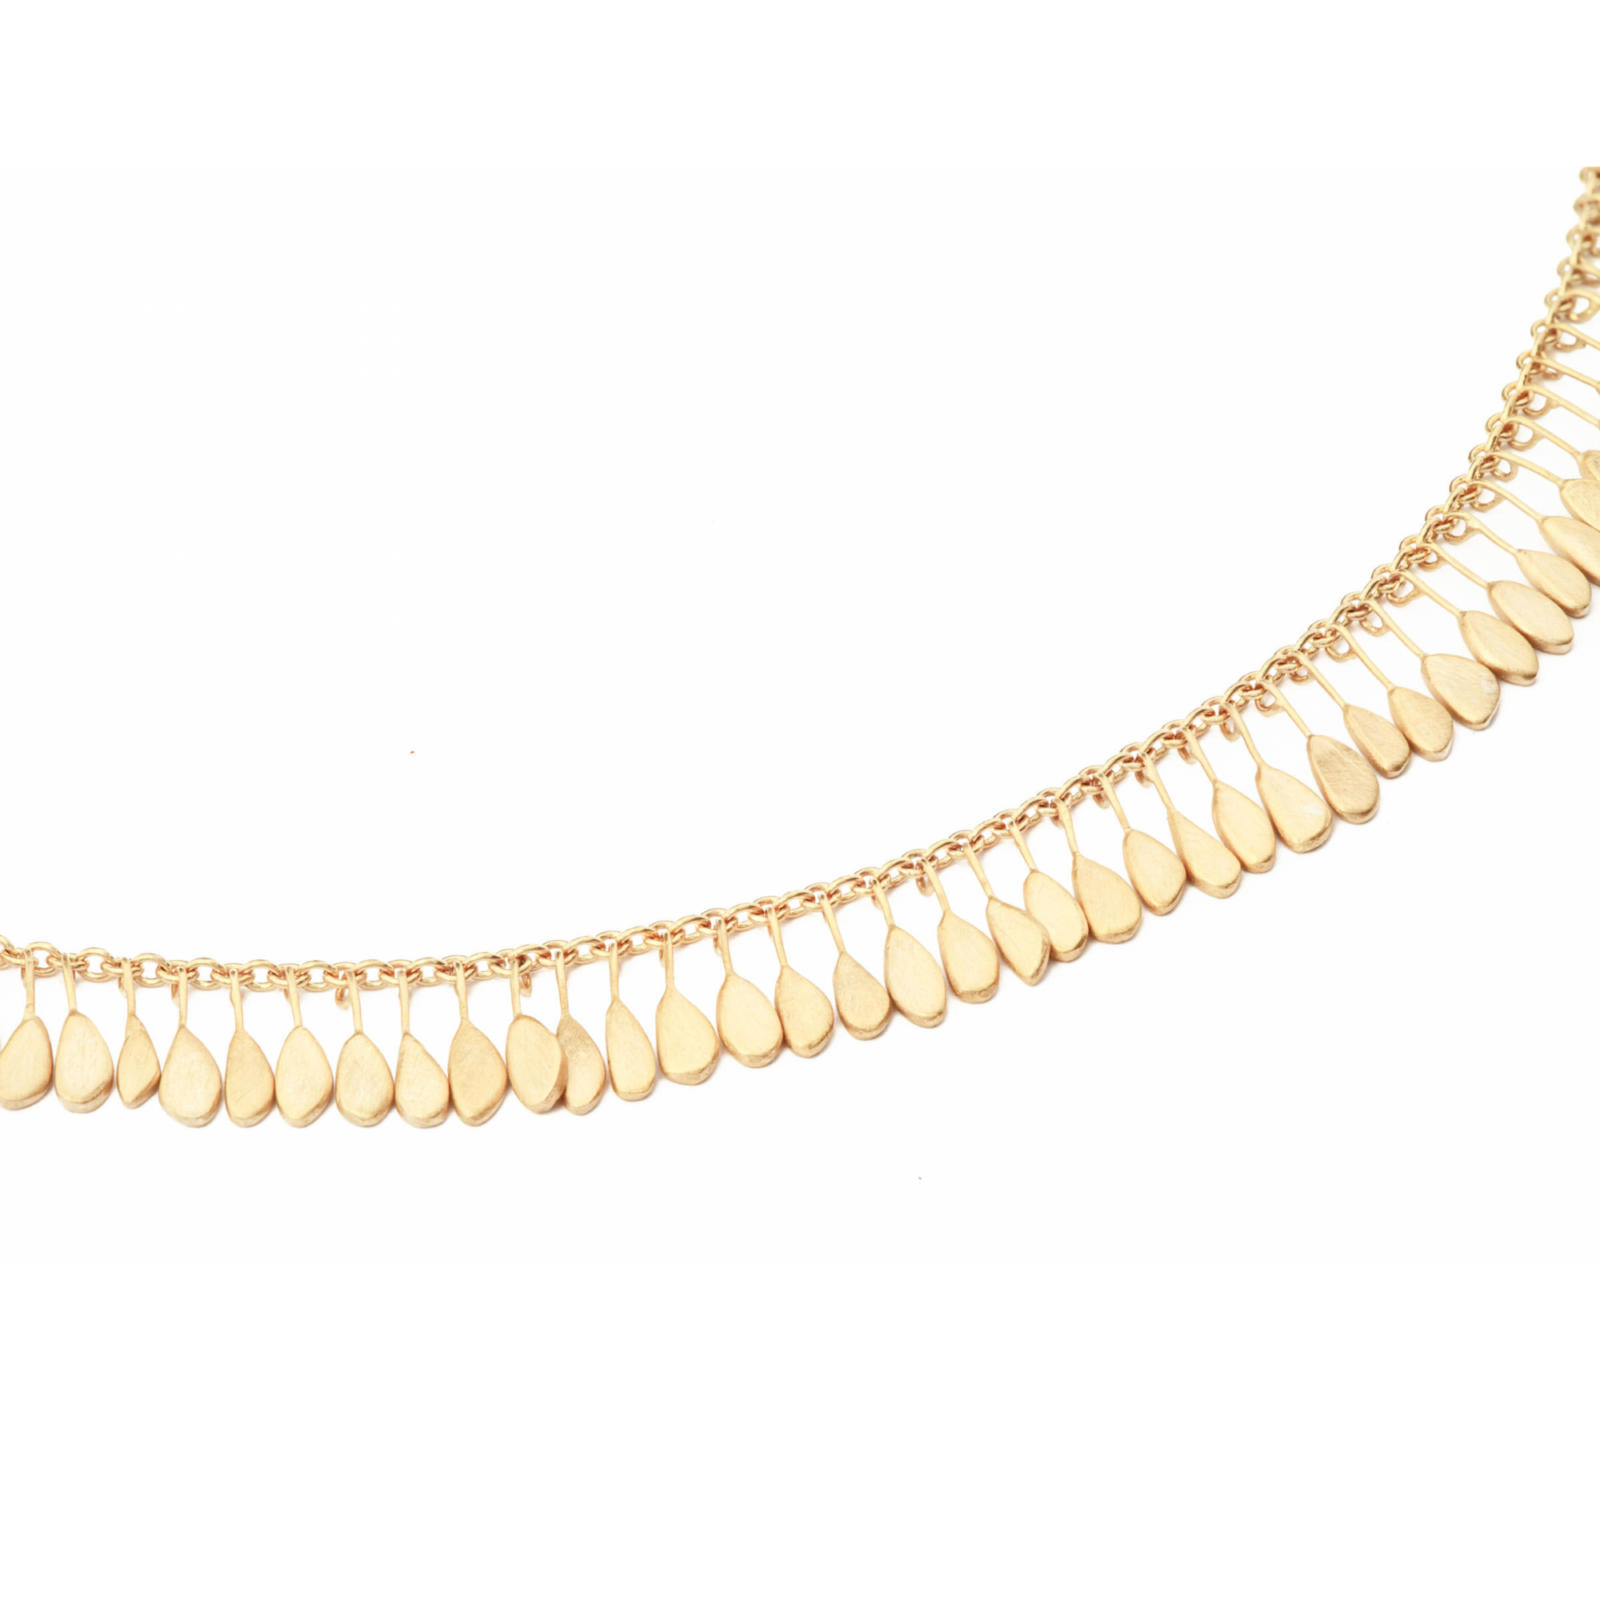 Sia Taylor MN8 Y Yellow Gold Necklace C